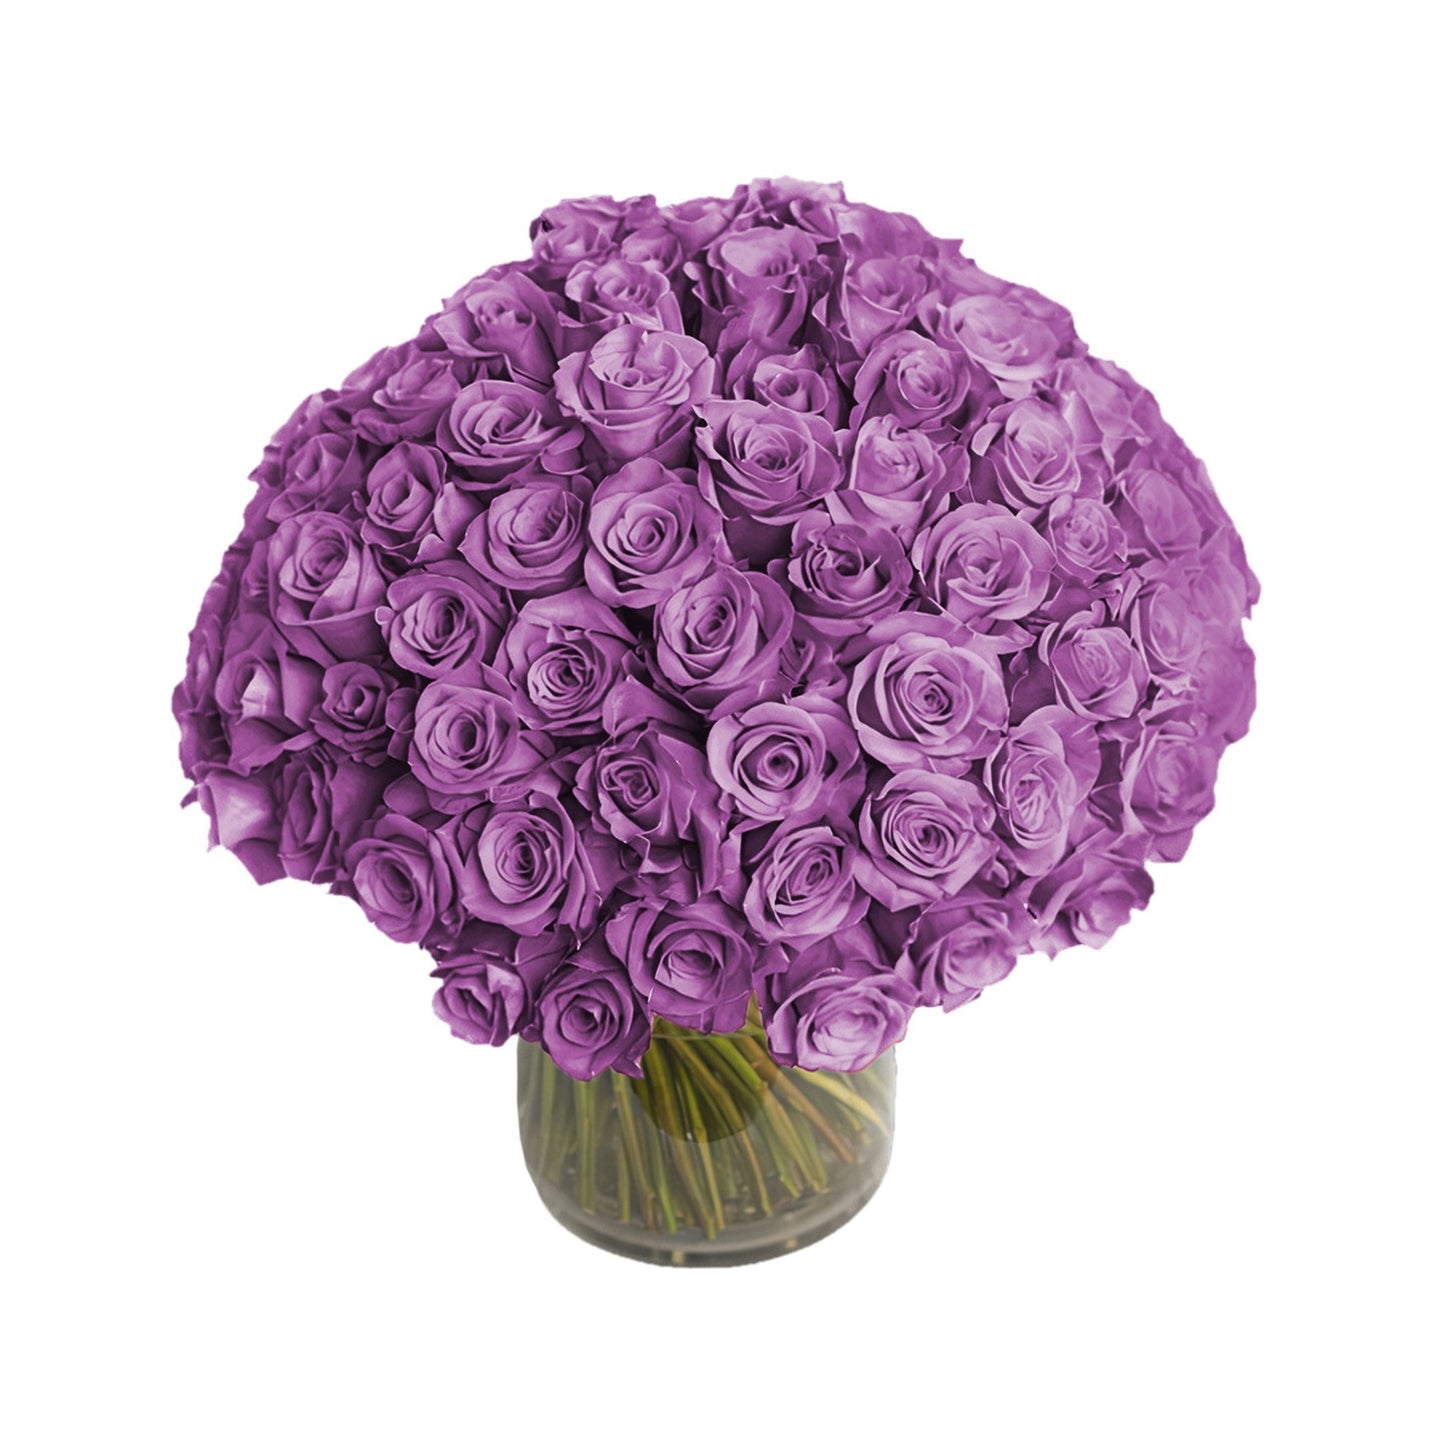 NYC Flower Delivery - Fresh Roses in a Vase | 100 Purple Roses - Roses